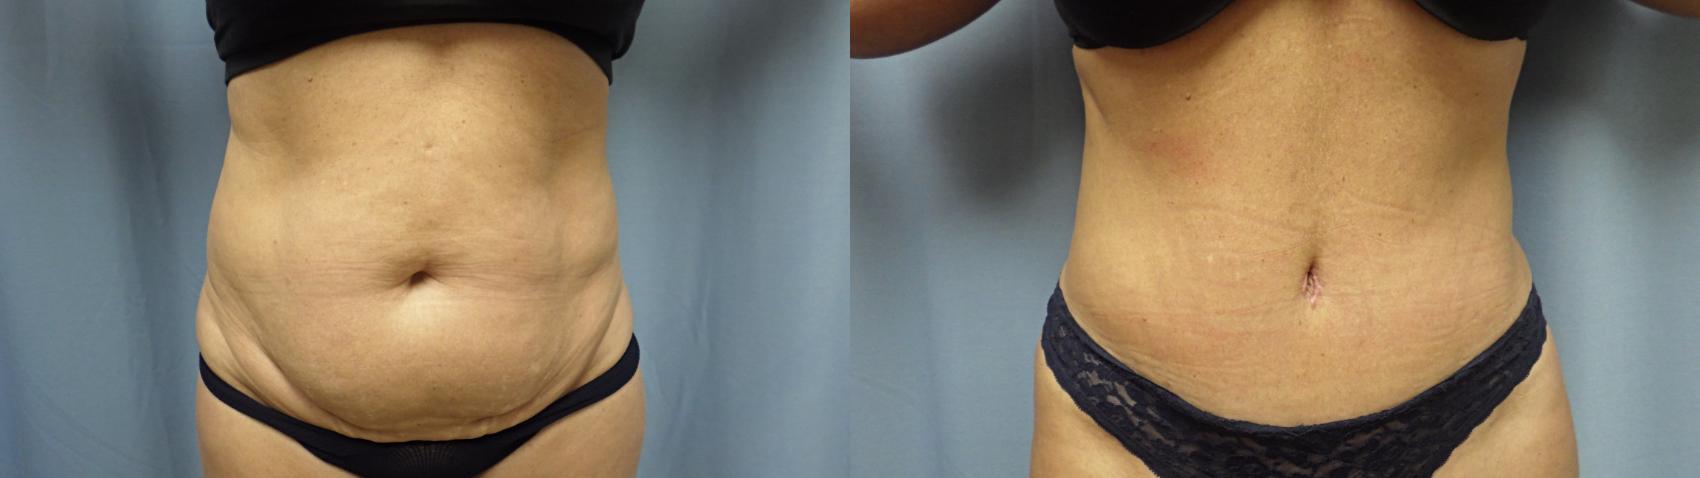 Abdominoplasty/Tummy Tuck Before & After Photo | Atlanta, GA | Plastic Surgery Center of the South